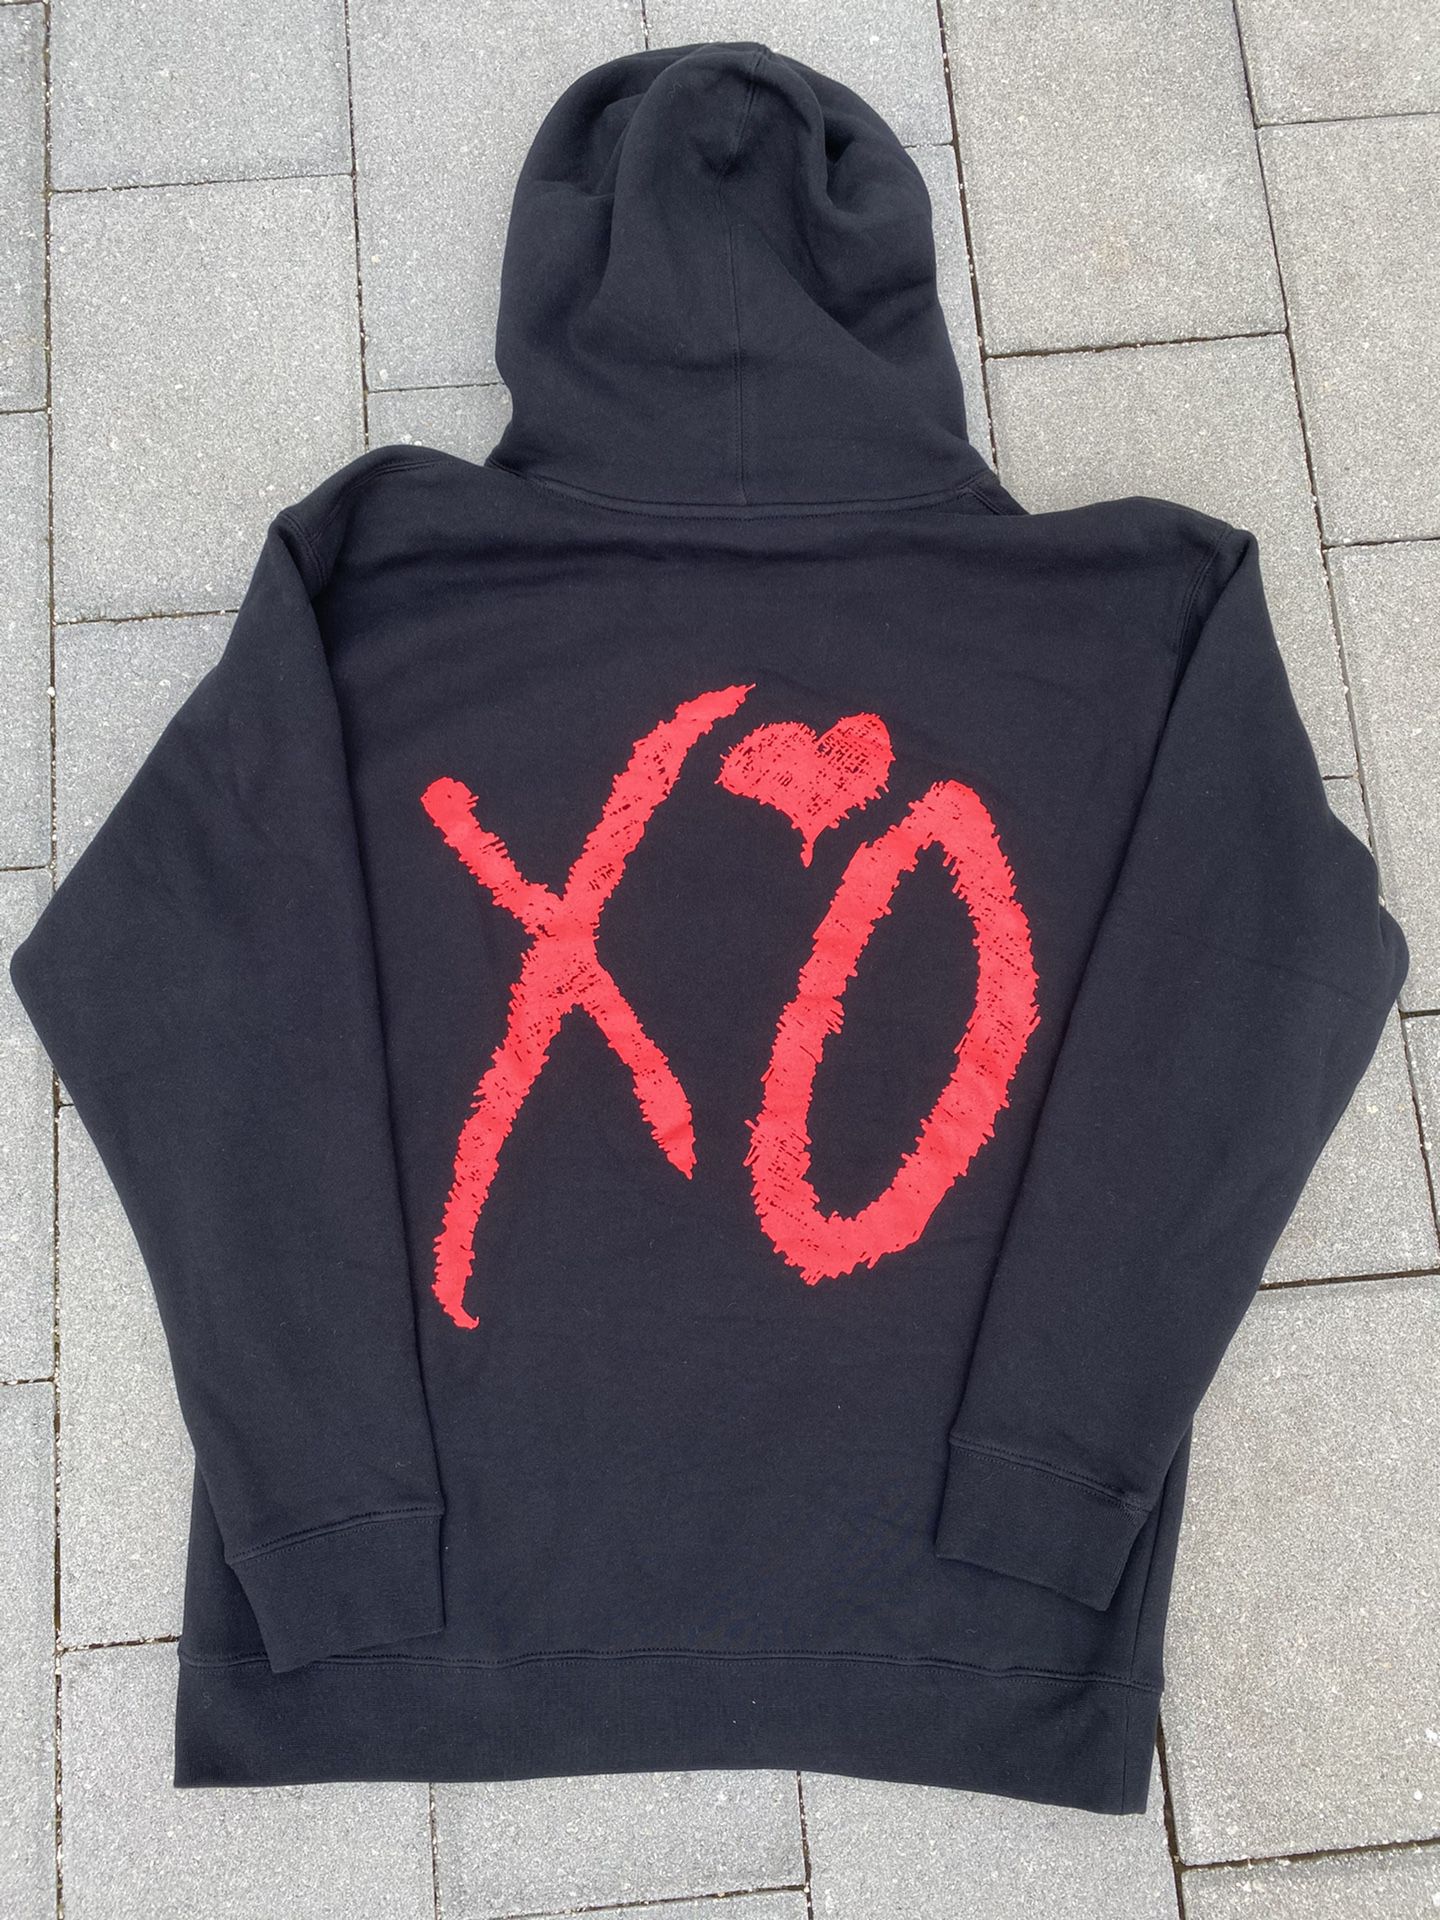 The Weeknd x Warren Lotas XO Capsule Collection I WAS NEVER THERE XL  Hoodie for Sale in Richardson, TX - OfferUp